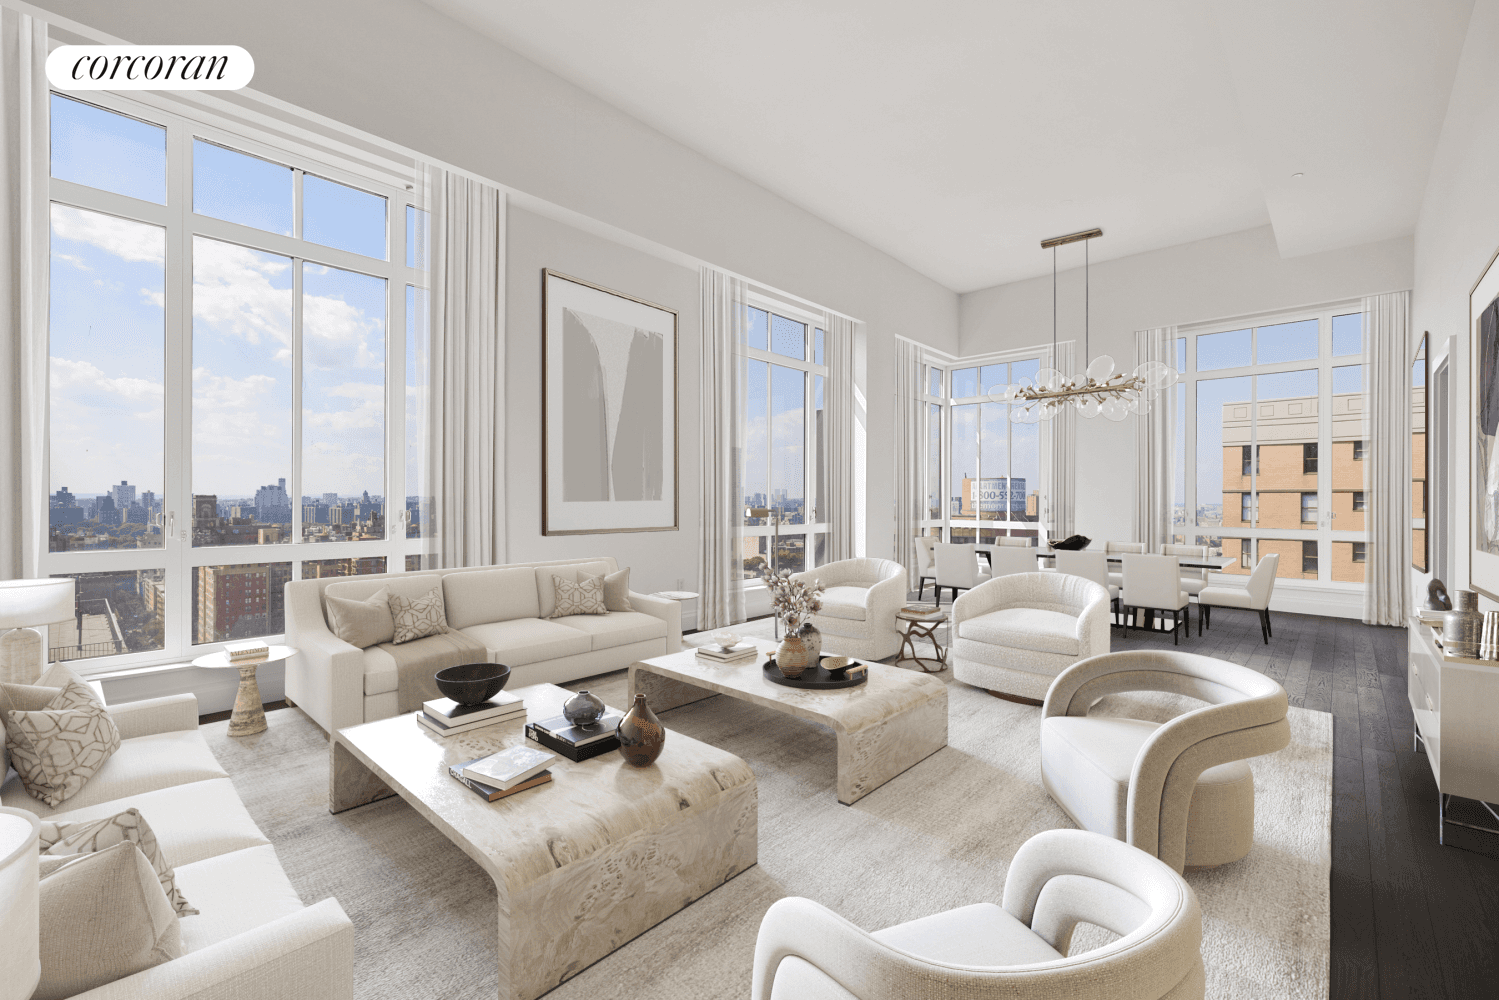 Perched high in the sky over Manhattan's iconic Upper East Side, Apartment 27B at The Kent, located at 200 East 95th Street, is a grandiose 4 bedroom, 4.